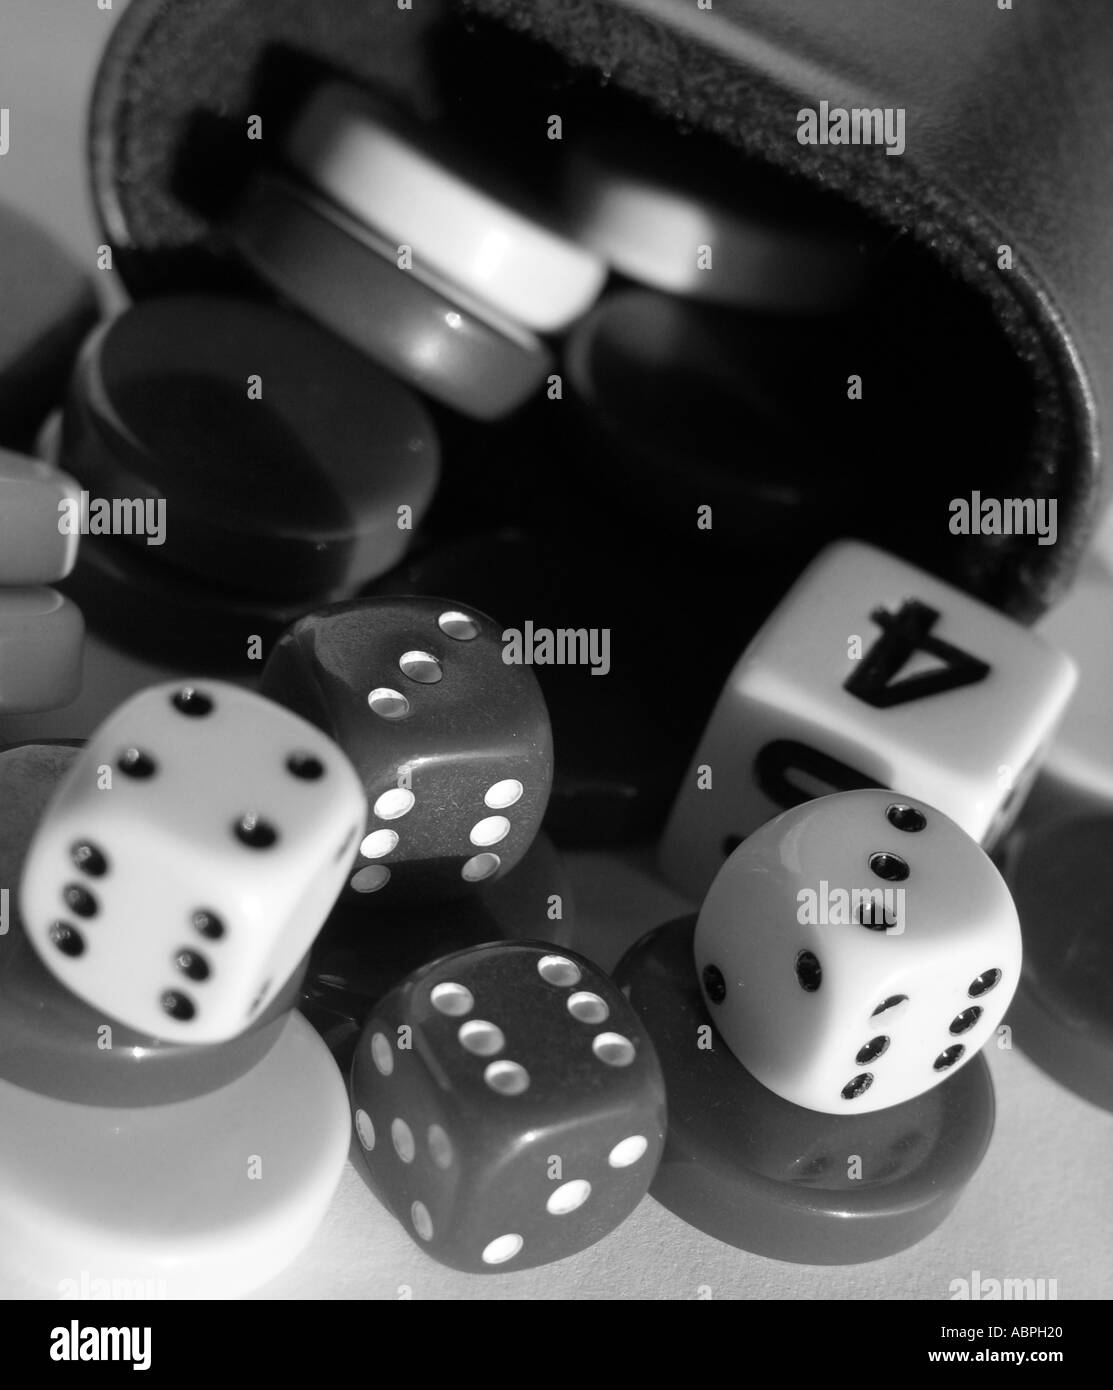 Dice, shaker and draught game pieces Stock Photo